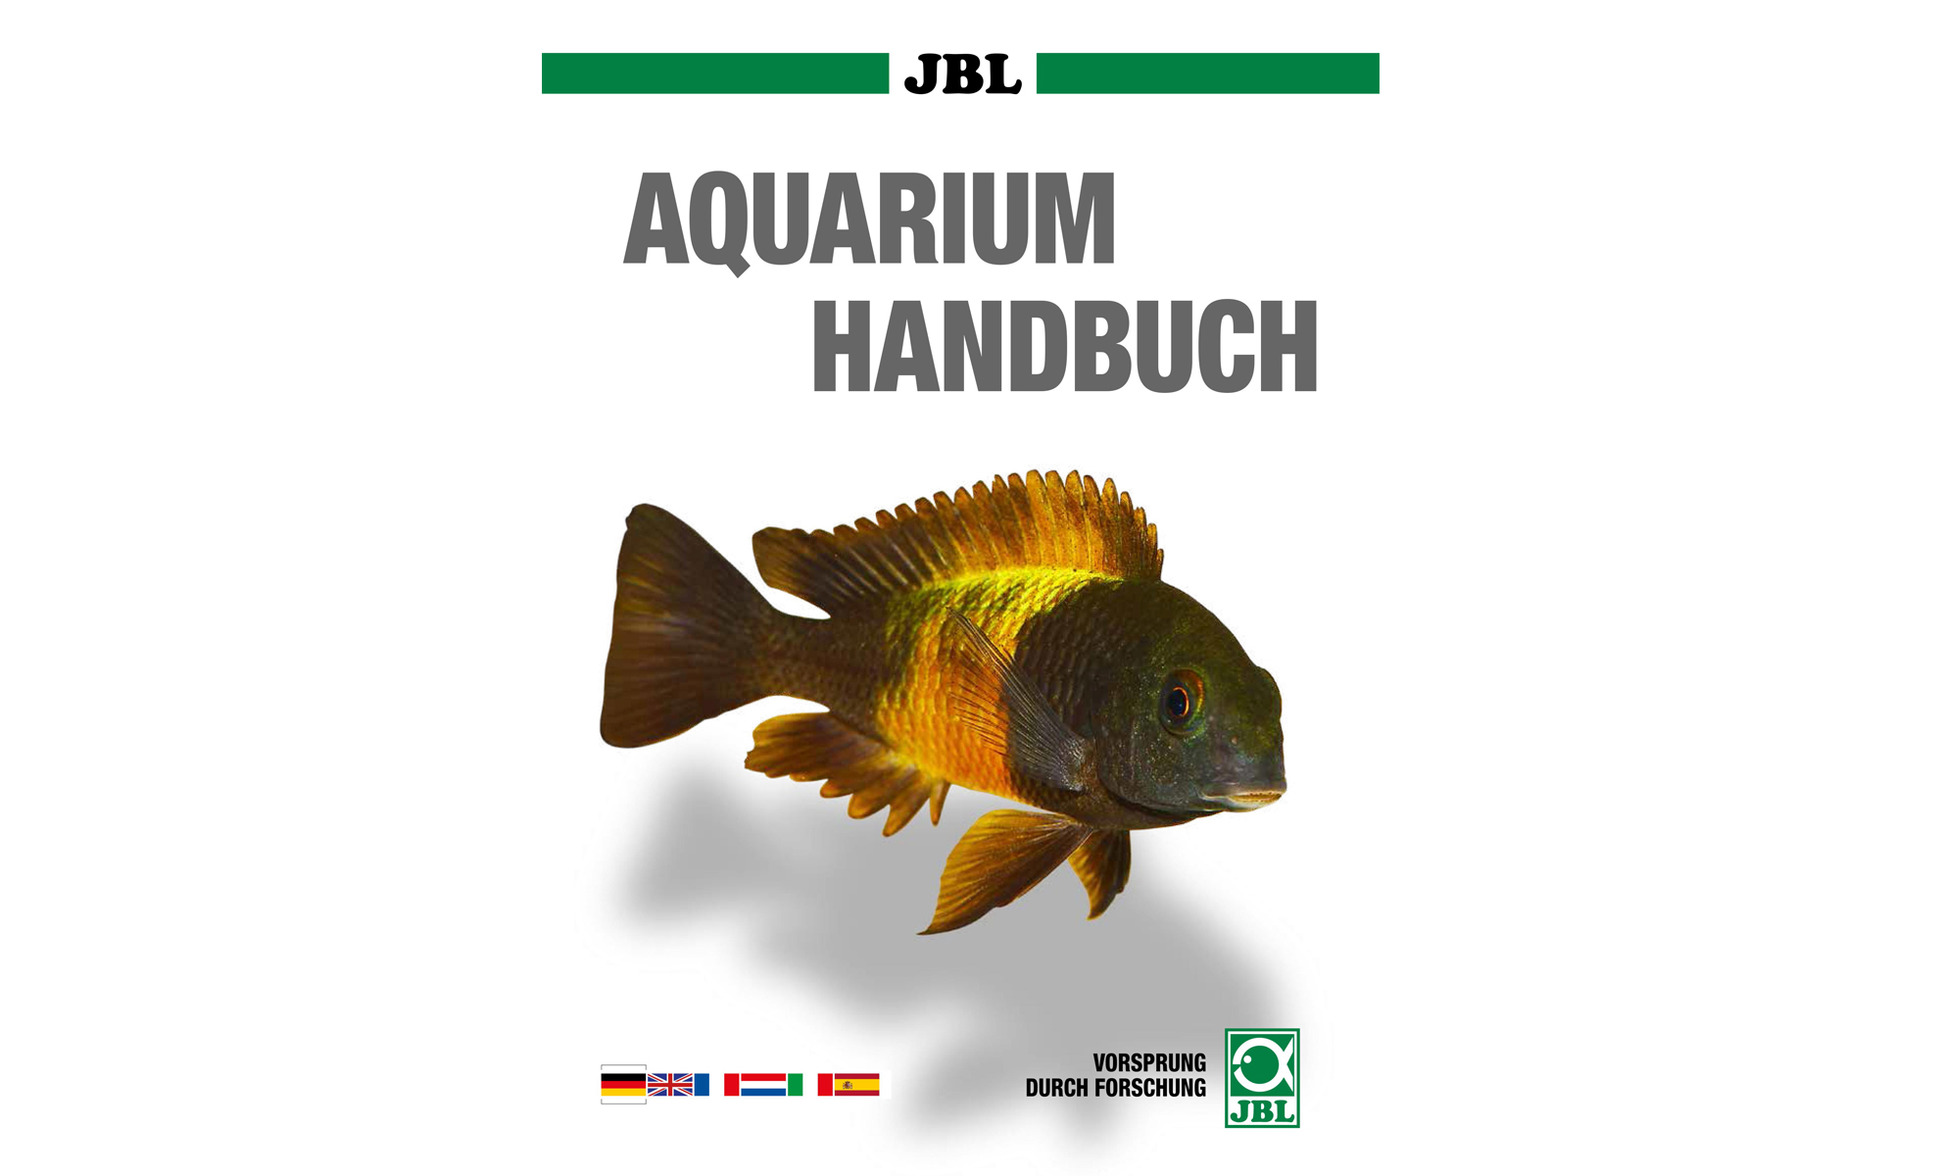 The First JBL Aquarium Manual is in the Making